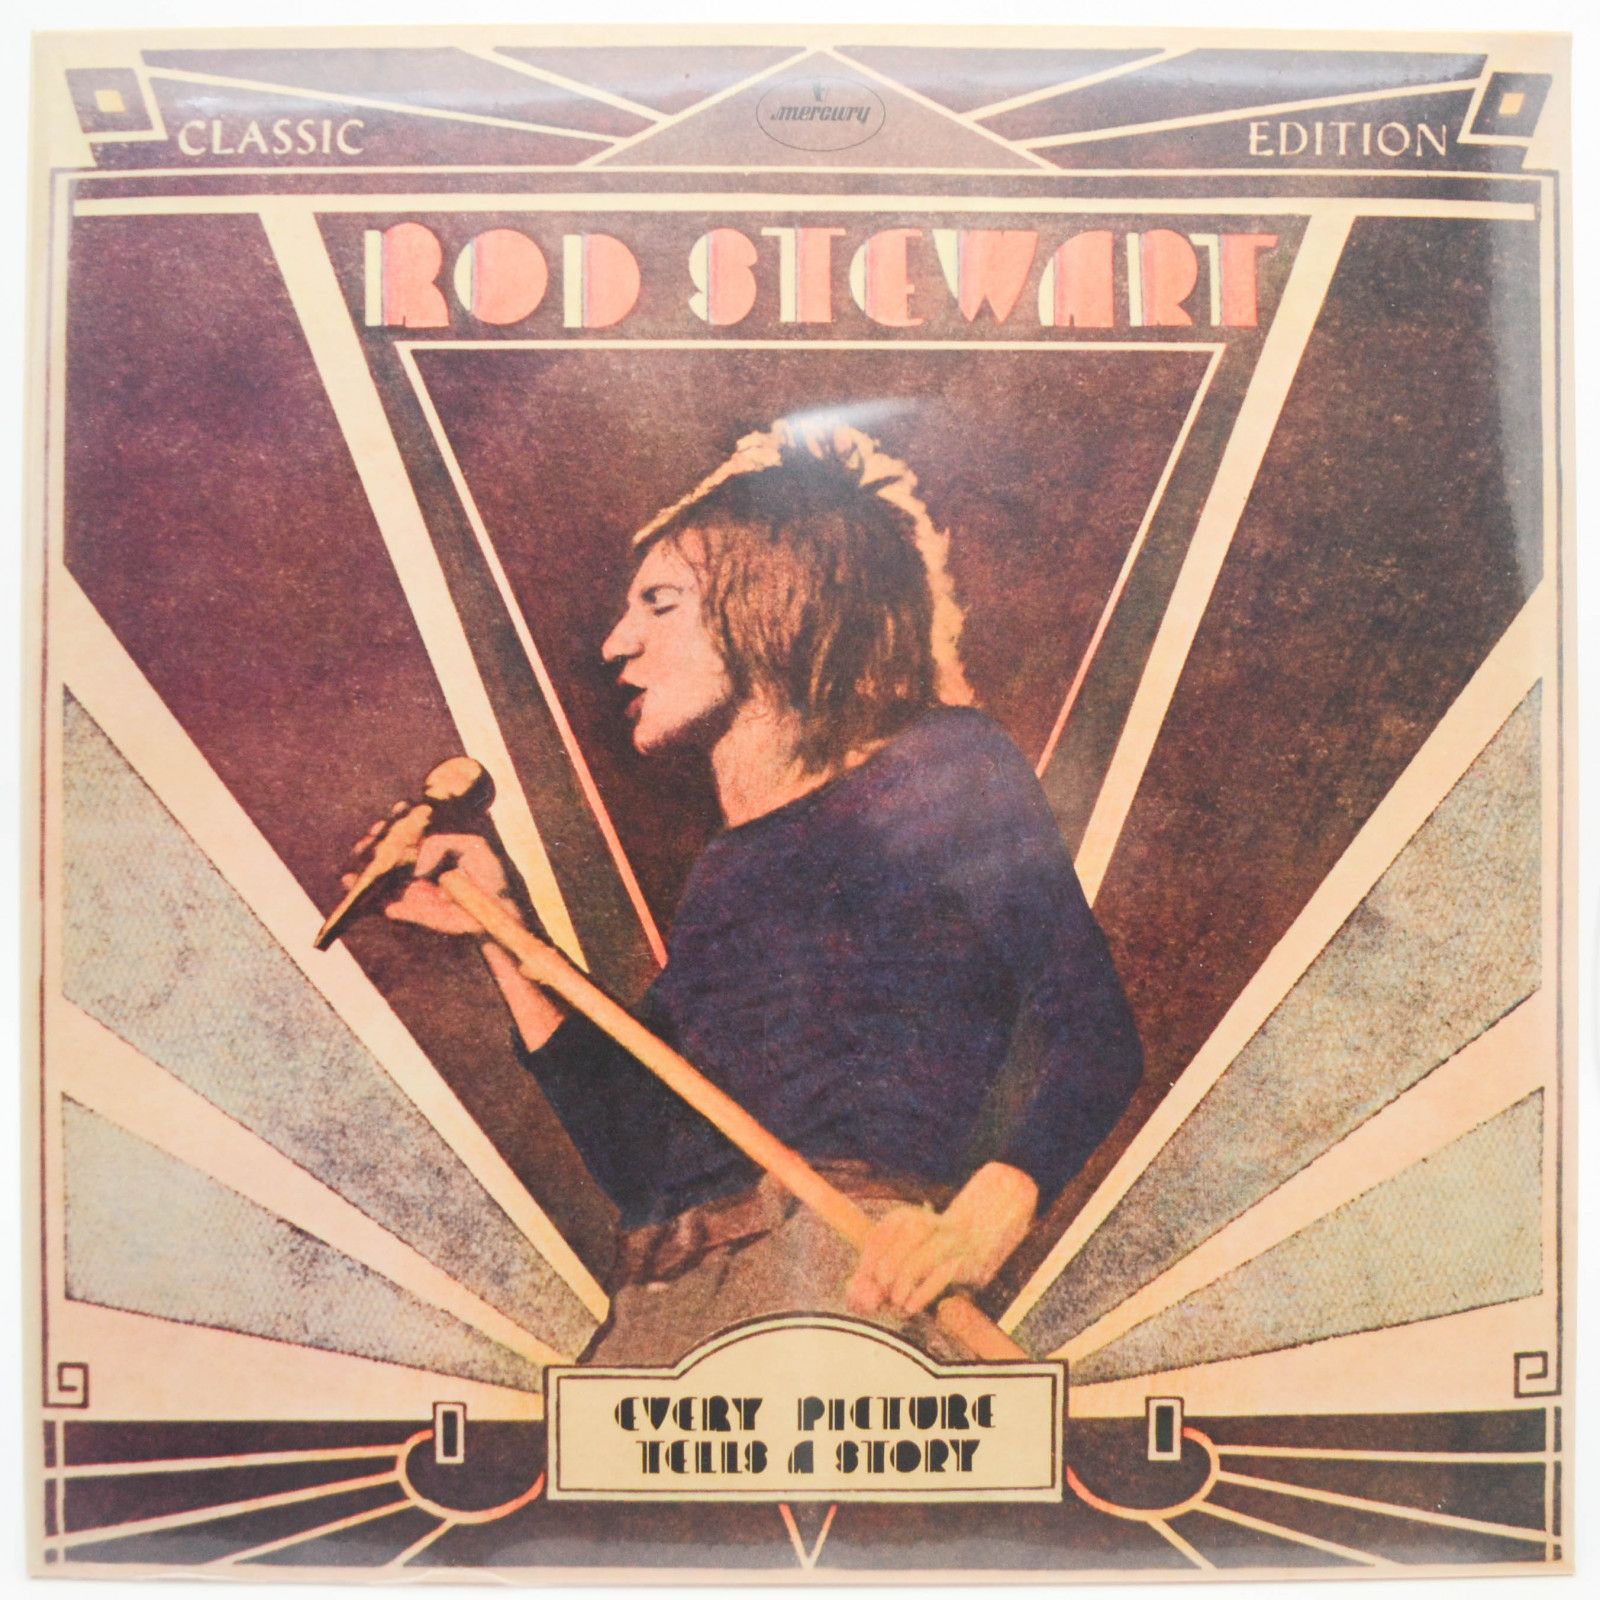 Rod Stewart — Every Picture Tells A Story, 1971